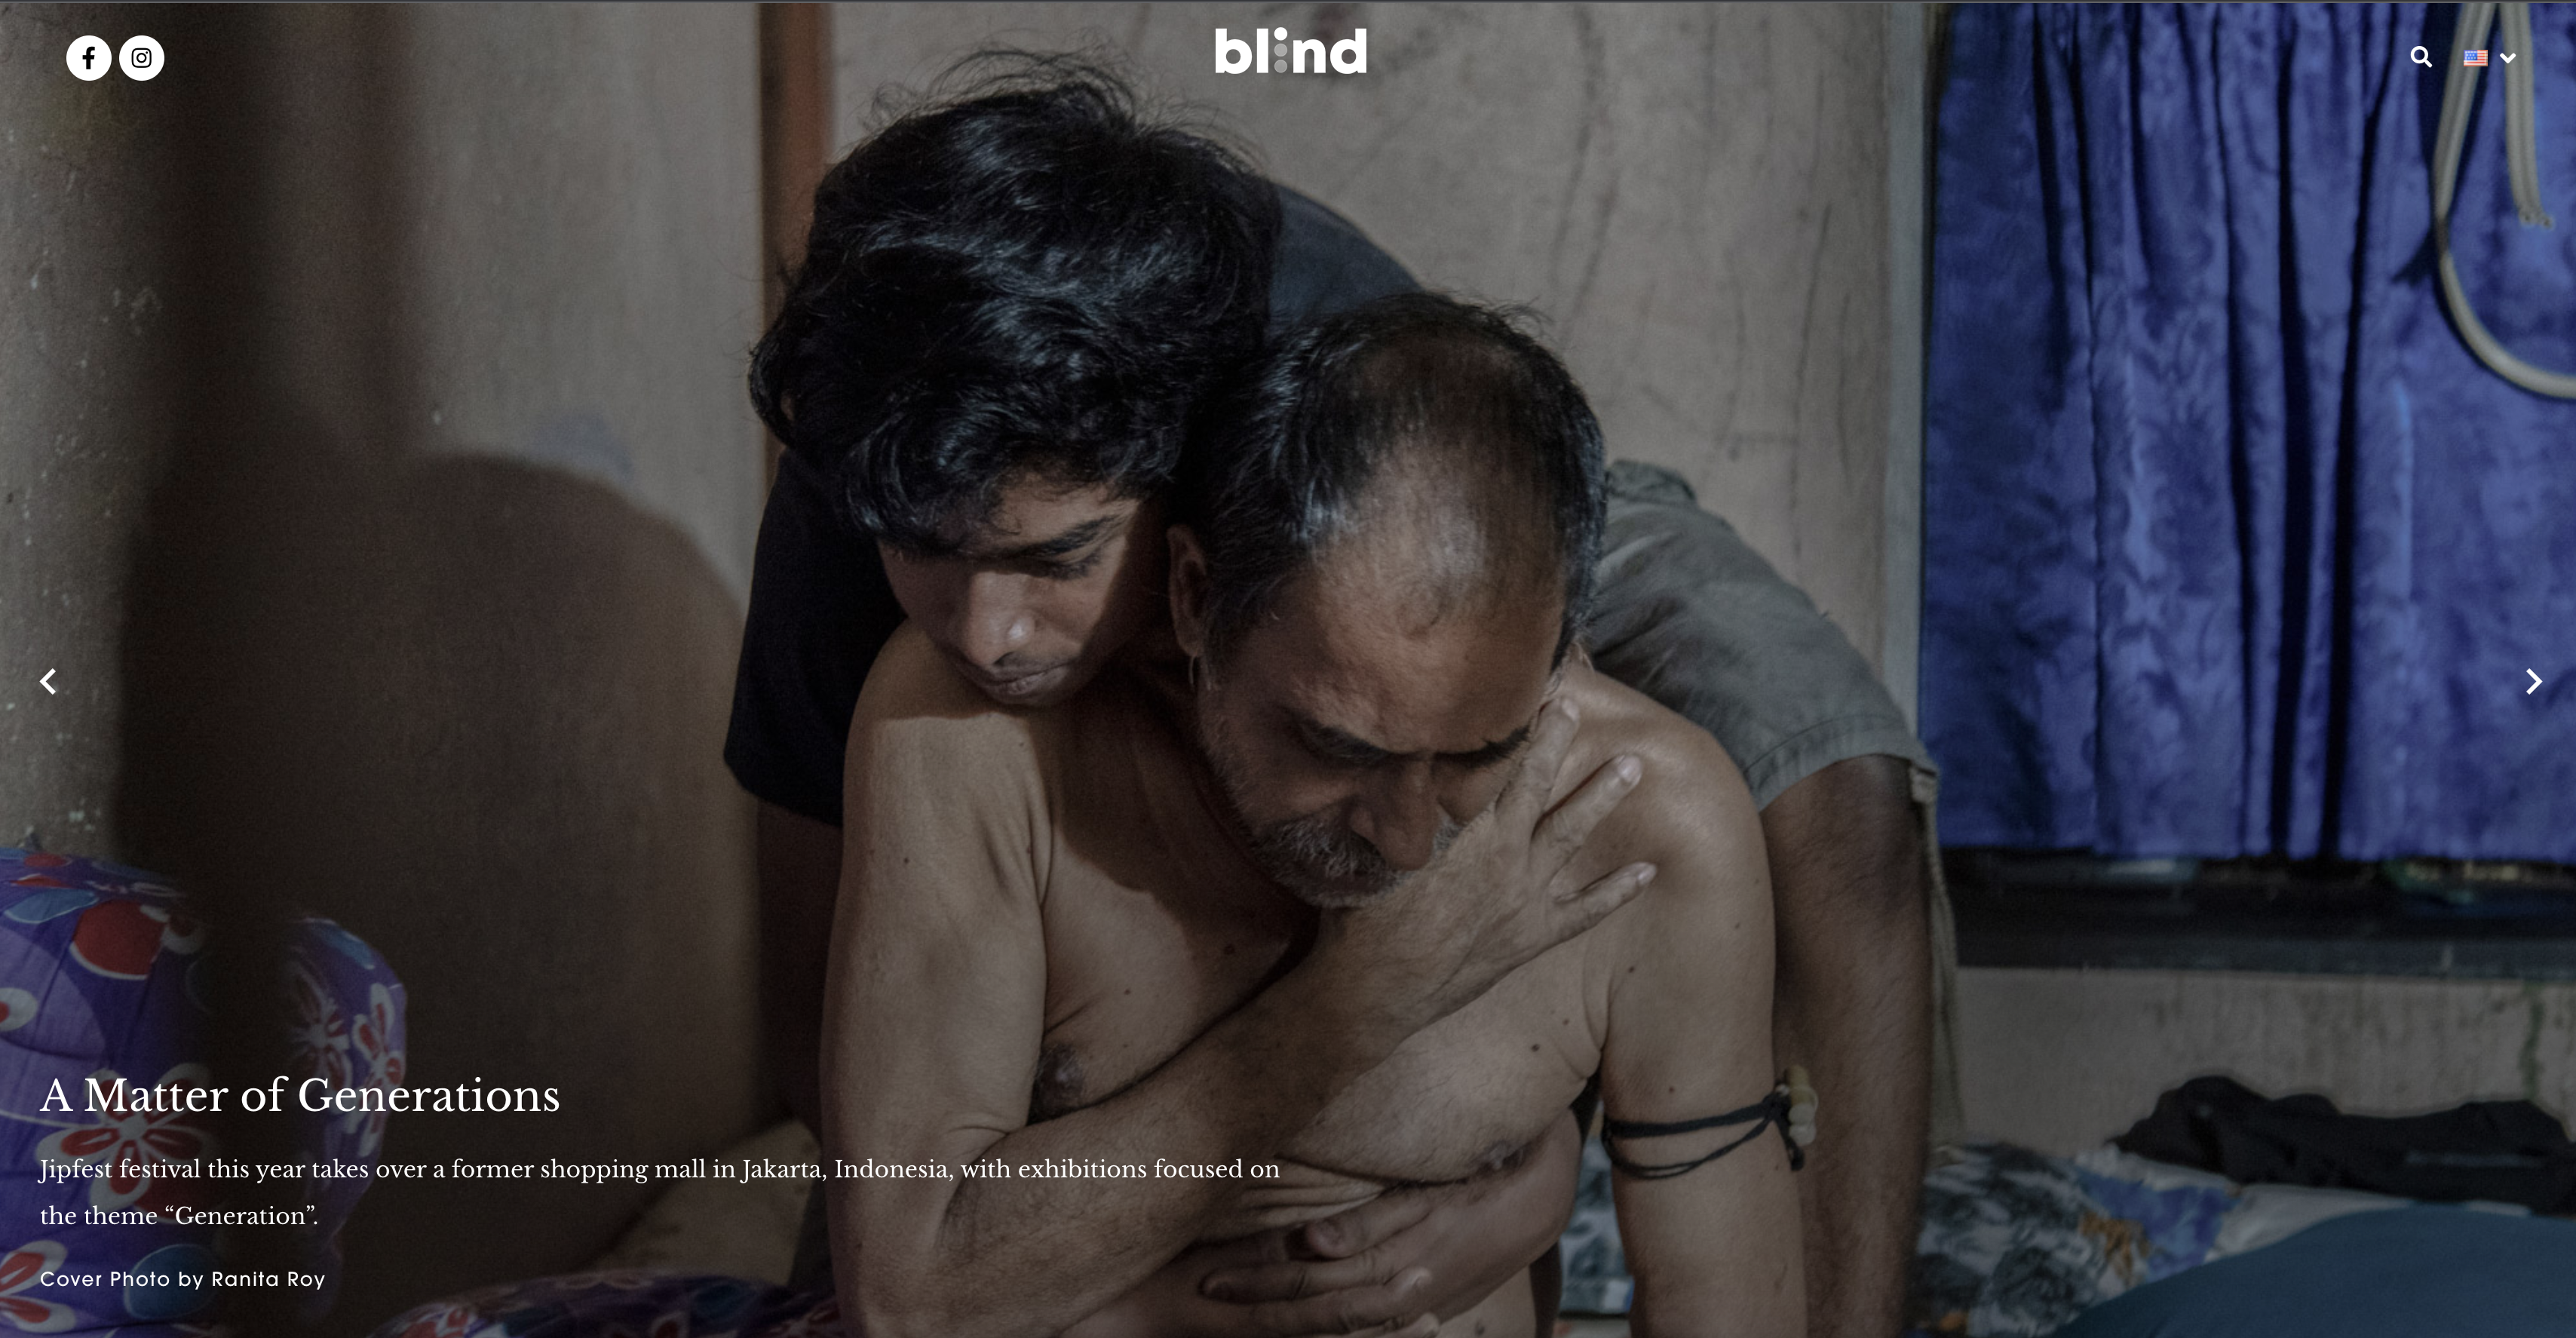 Featured in Blind Magazine as a part of Jakarta Photo Festival